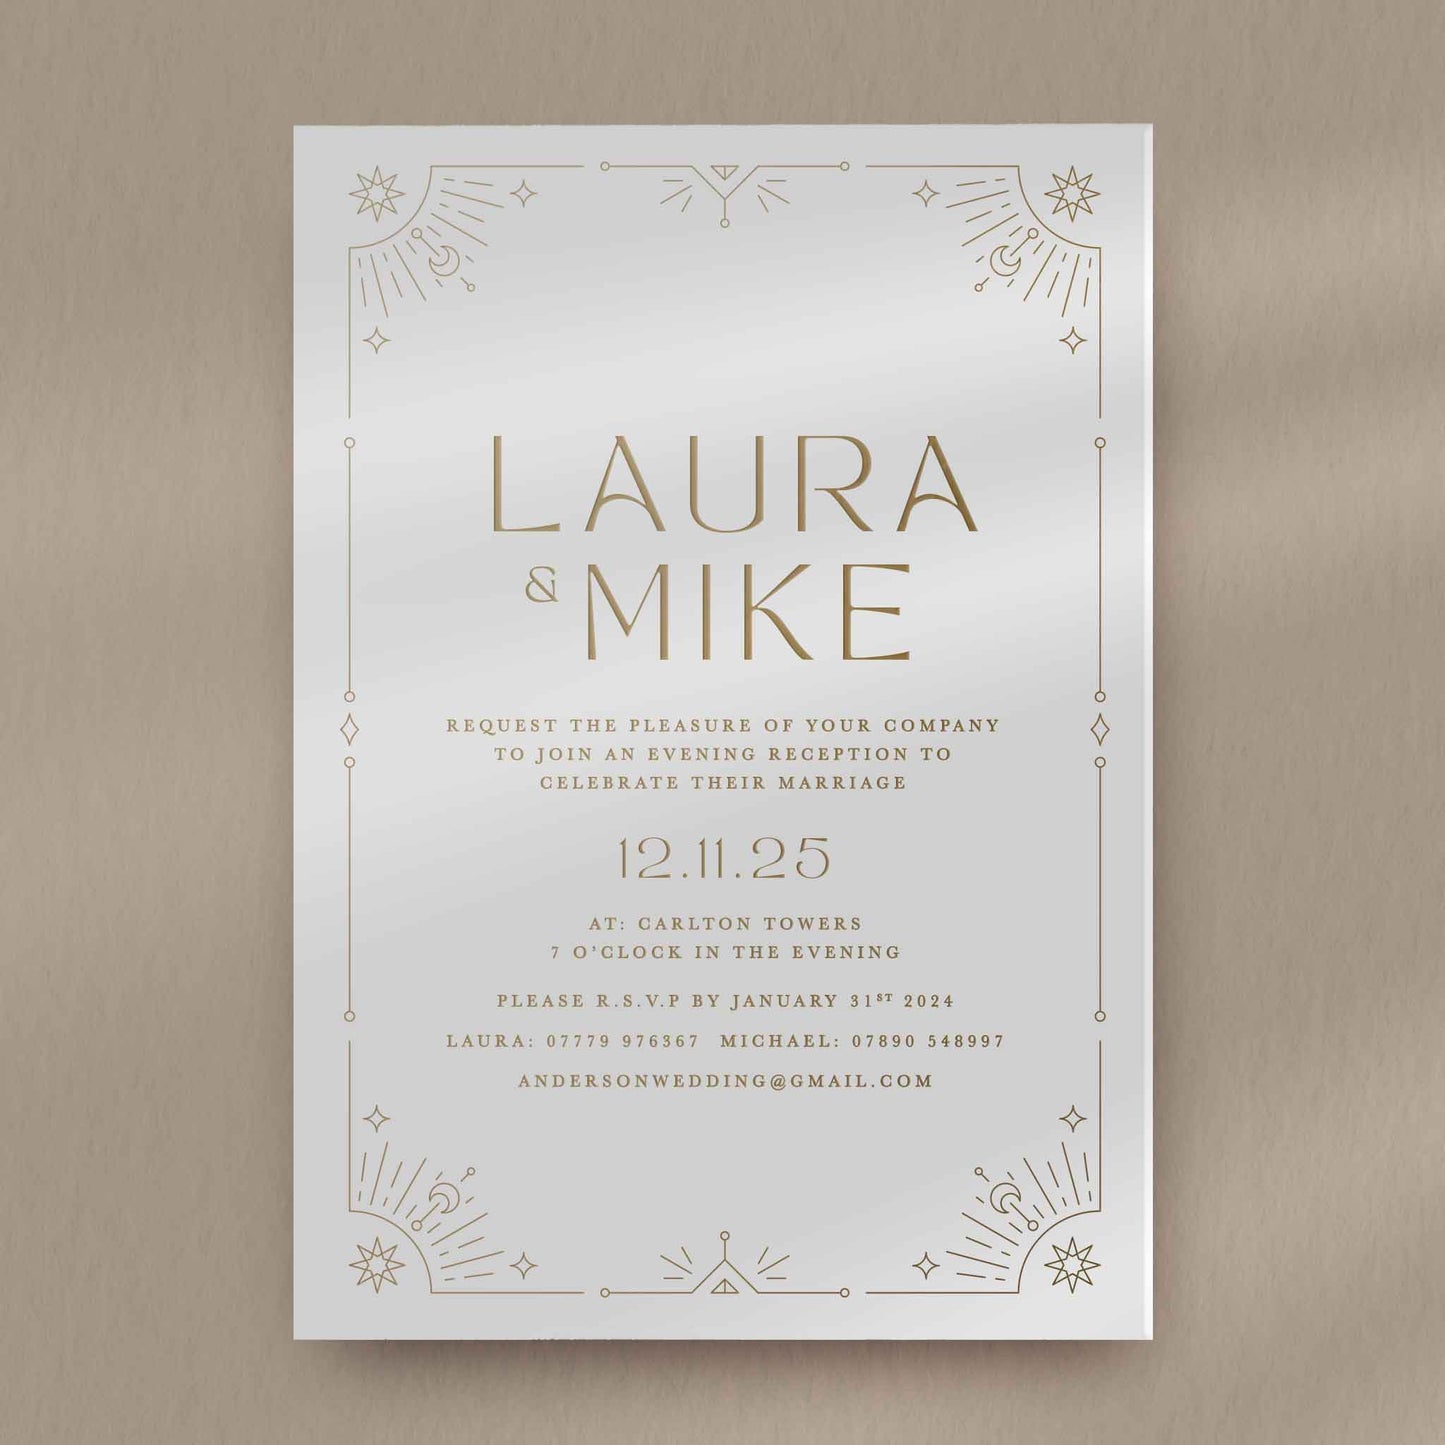 Evening Invitation Sample  Ivy and Gold Wedding Stationery Laura  